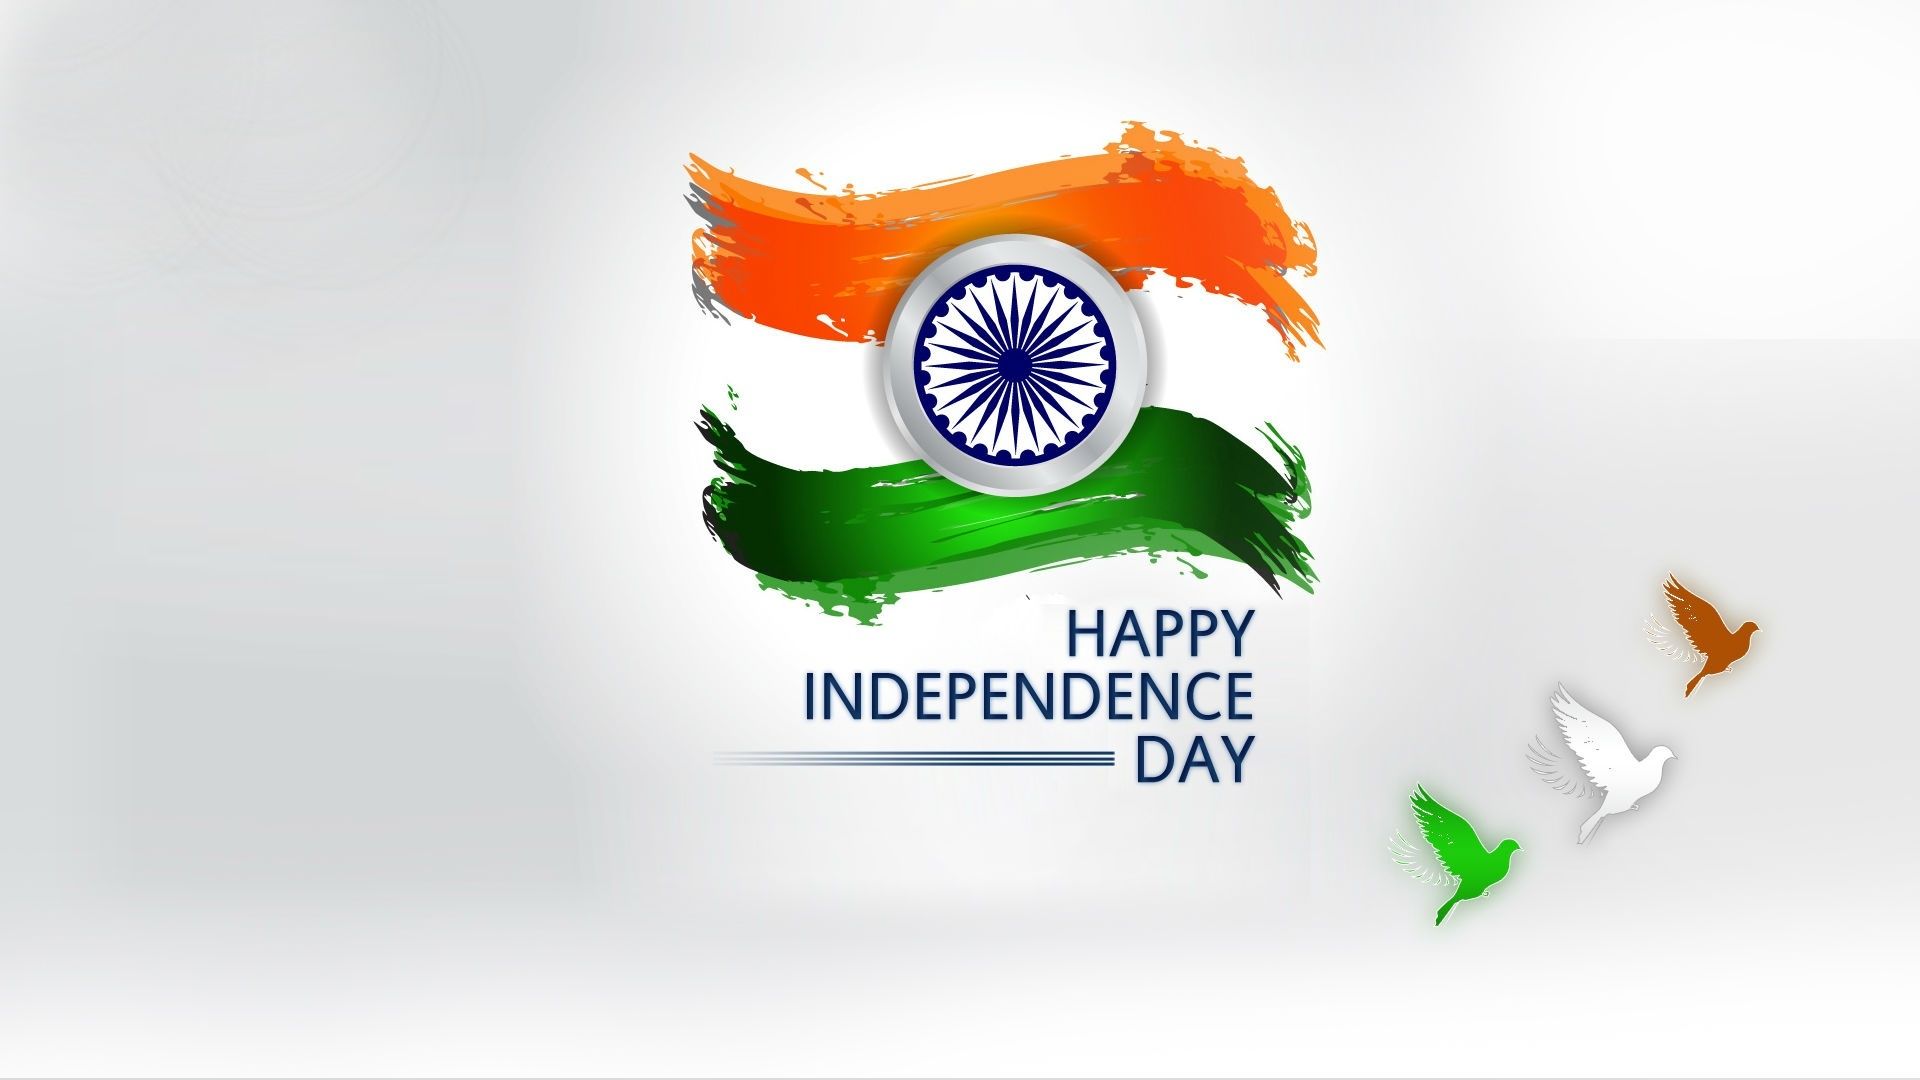 Happy Independence Day 2020 Images – 15 August HD Image, Photos, Wallpaper Free Download